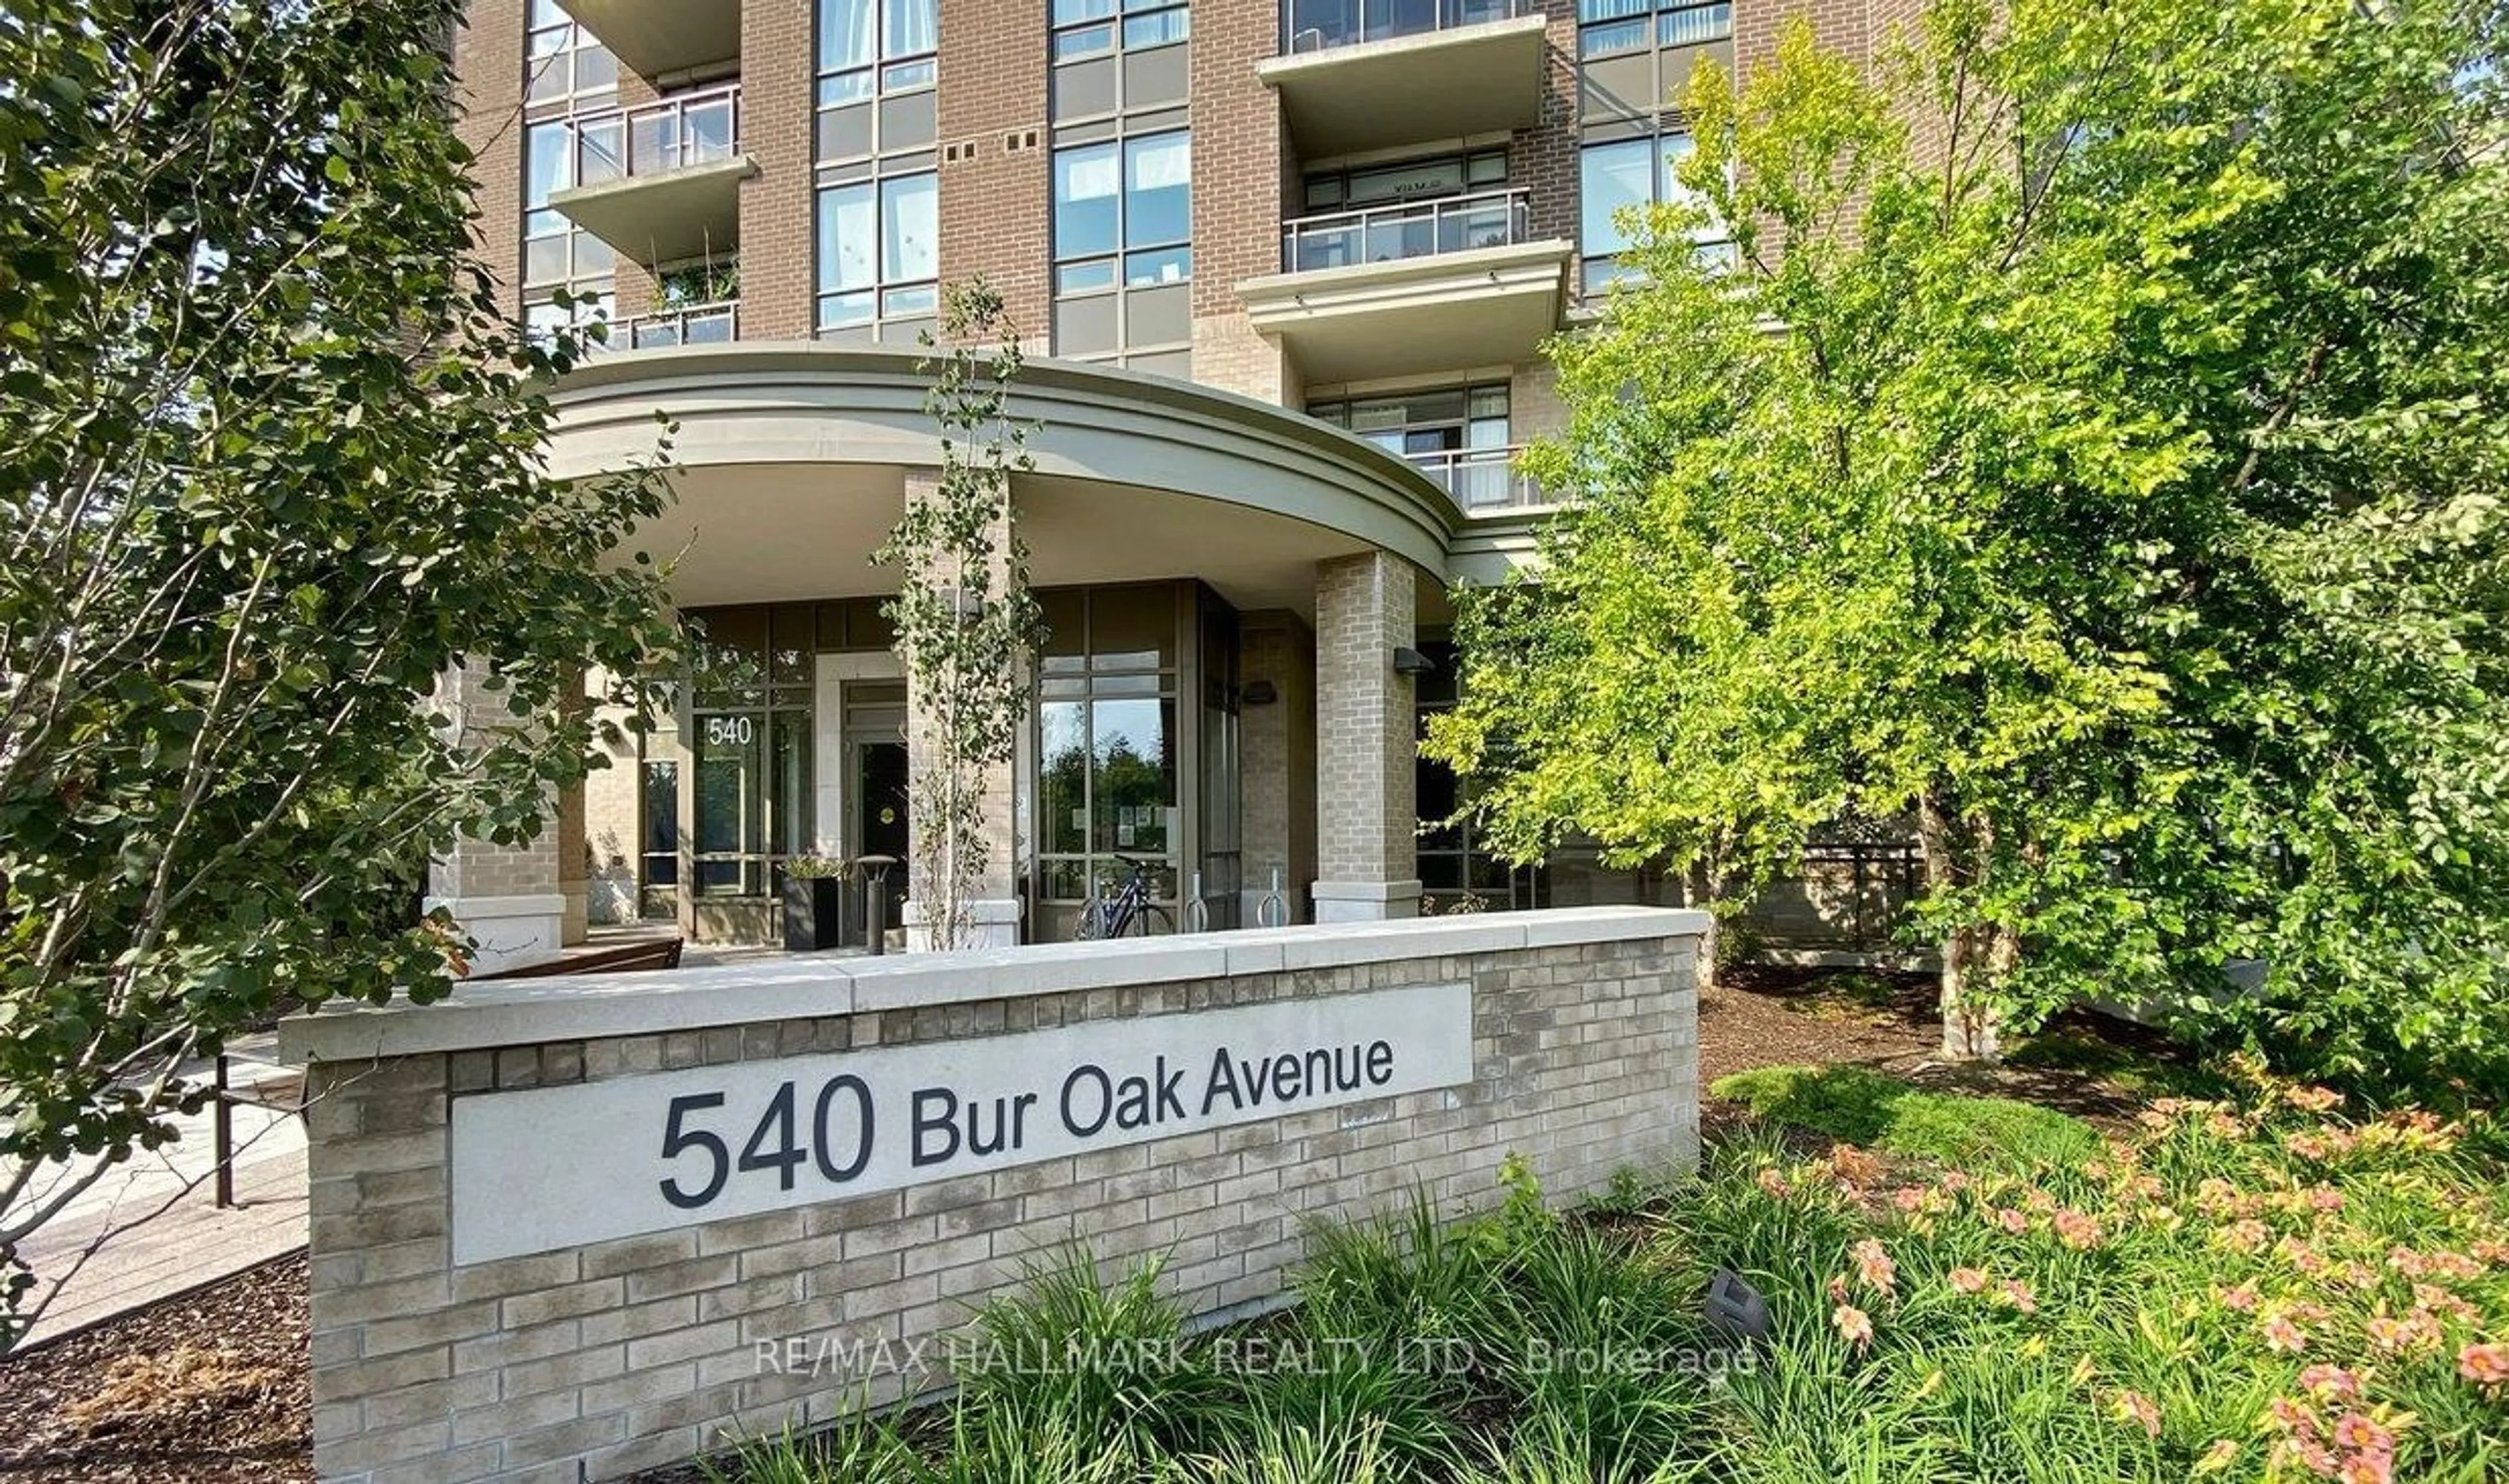 A pic from exterior of the house or condo for 540 Bur Oak Ave #606, Markham Ontario L6C 0Y2